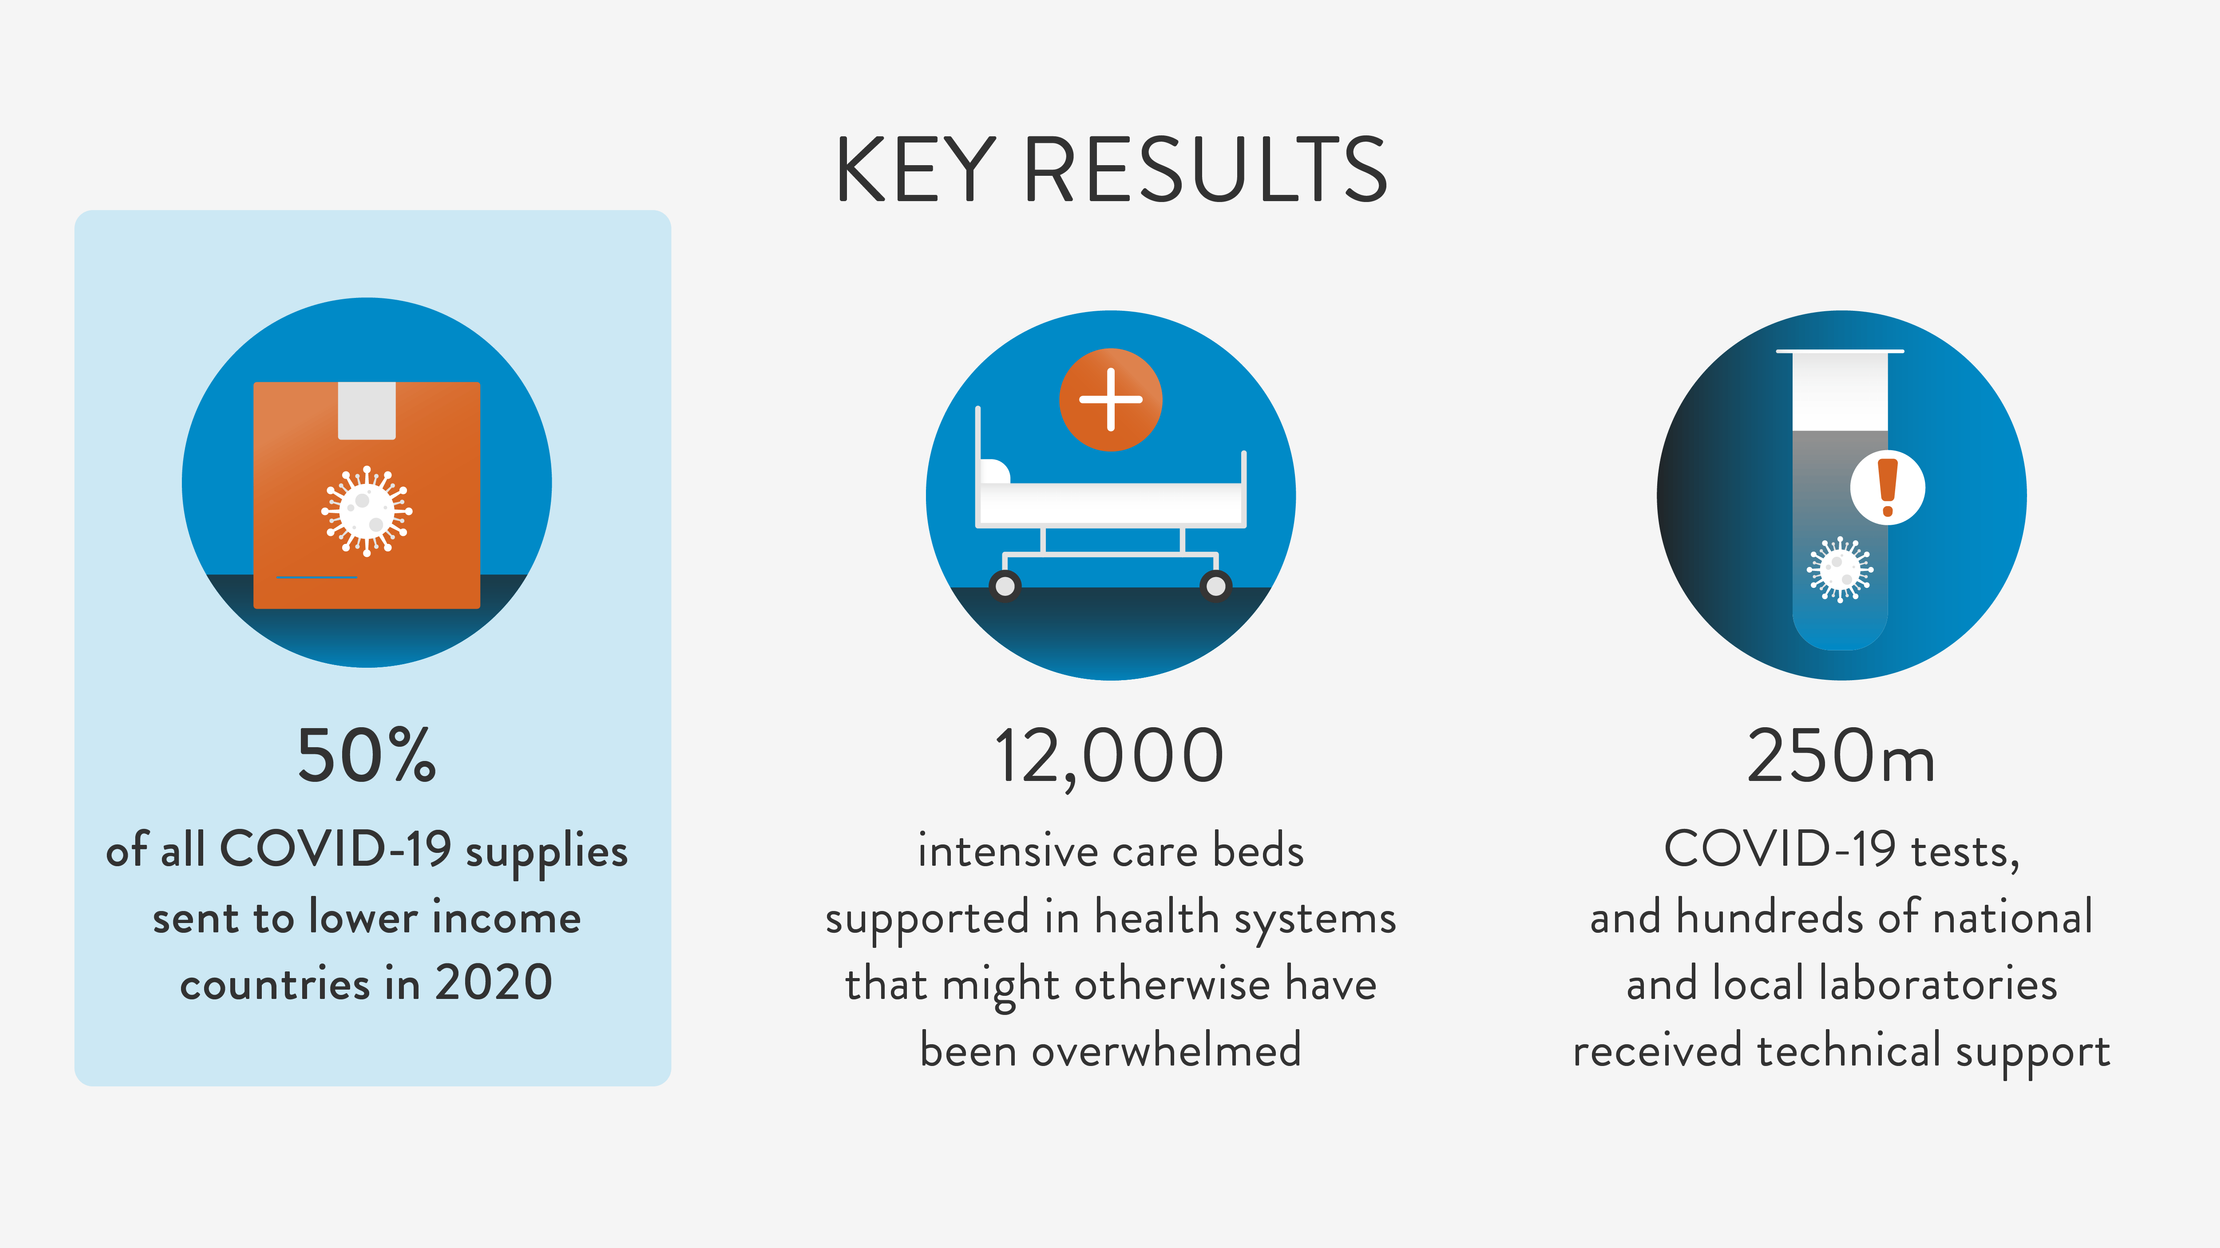 Some illustrated key results from the 'racing against the pandemic' page. It includes 12,000 intensive care beds supported in otherwhise overwhelmed health systems.